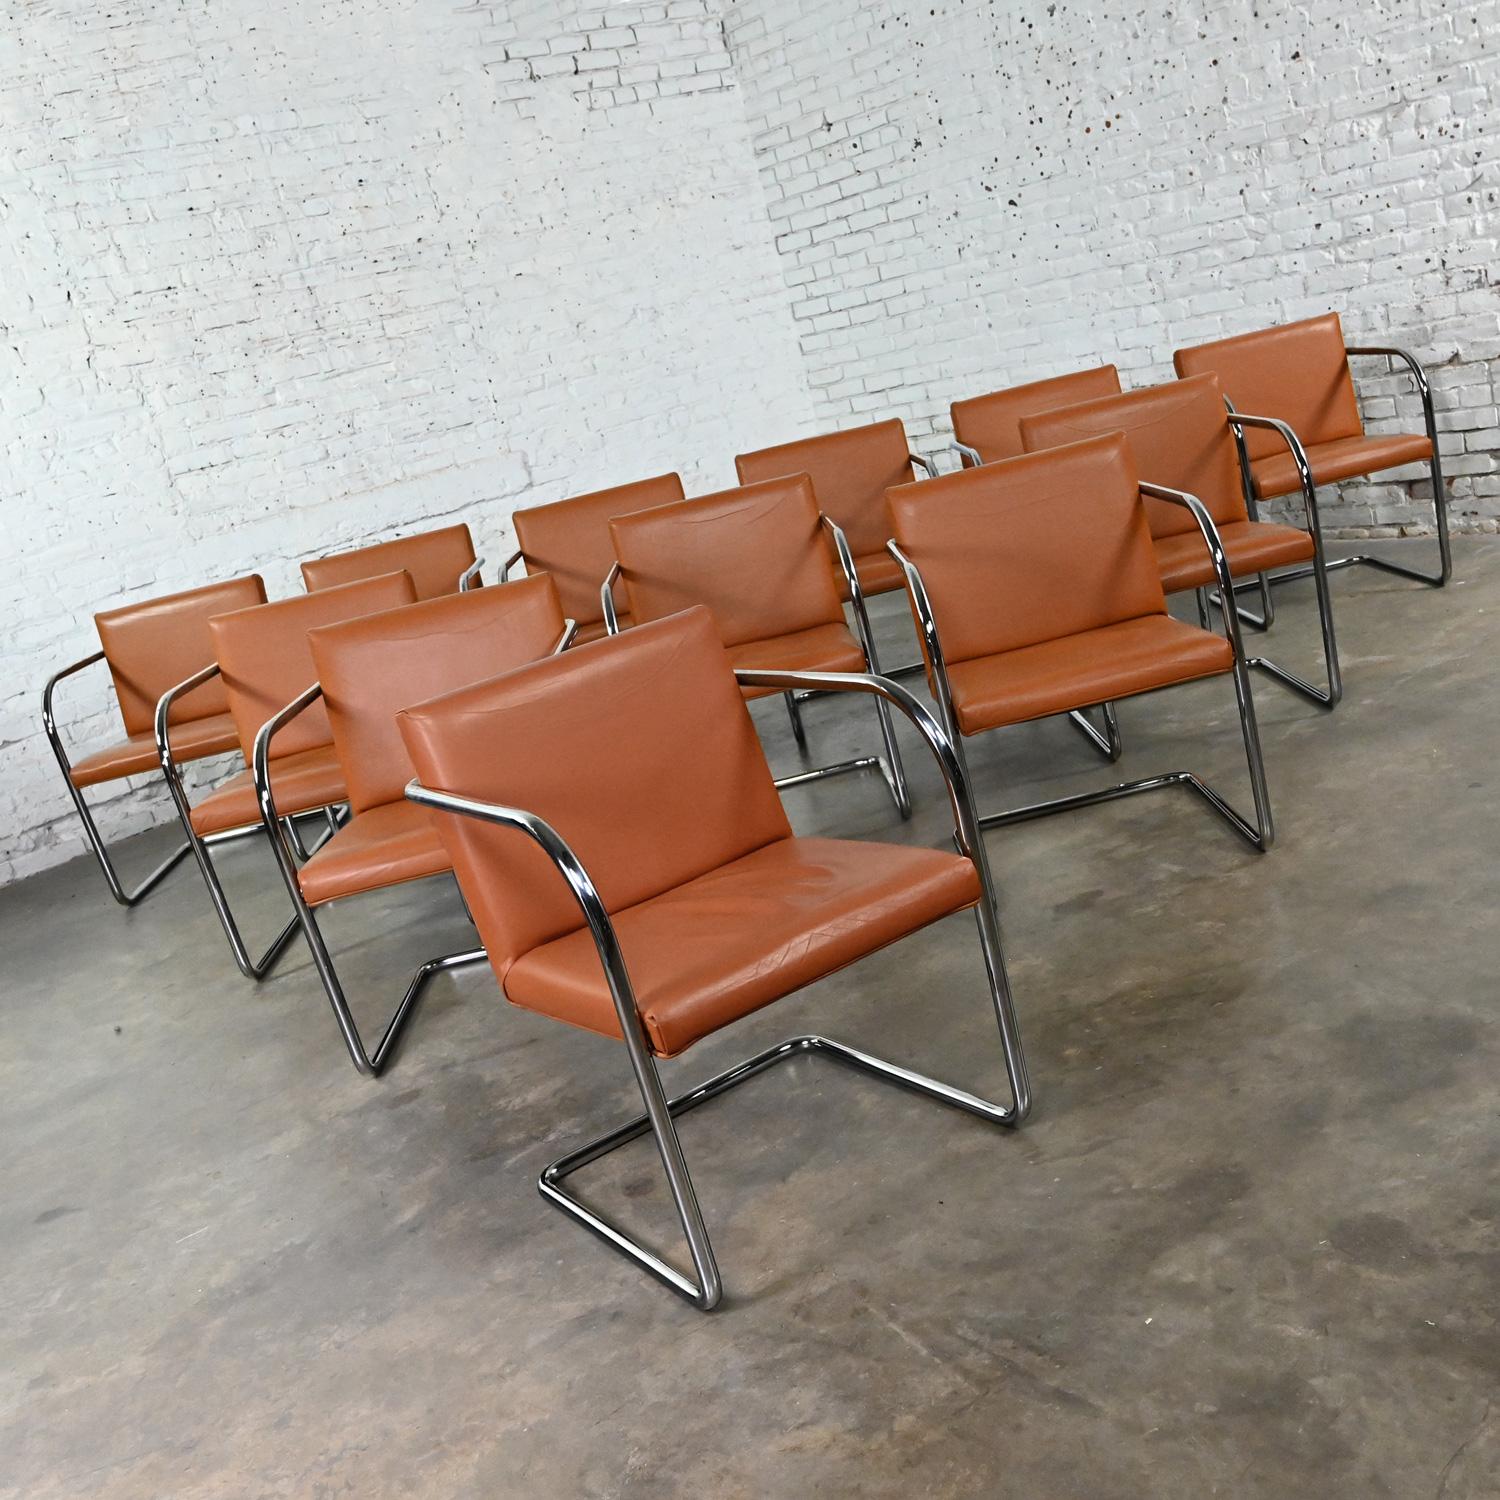 Thonet Bauhaus Brno Style Chairs Chrome & Cognac Leather Cantilever Set of 12  For Sale 5